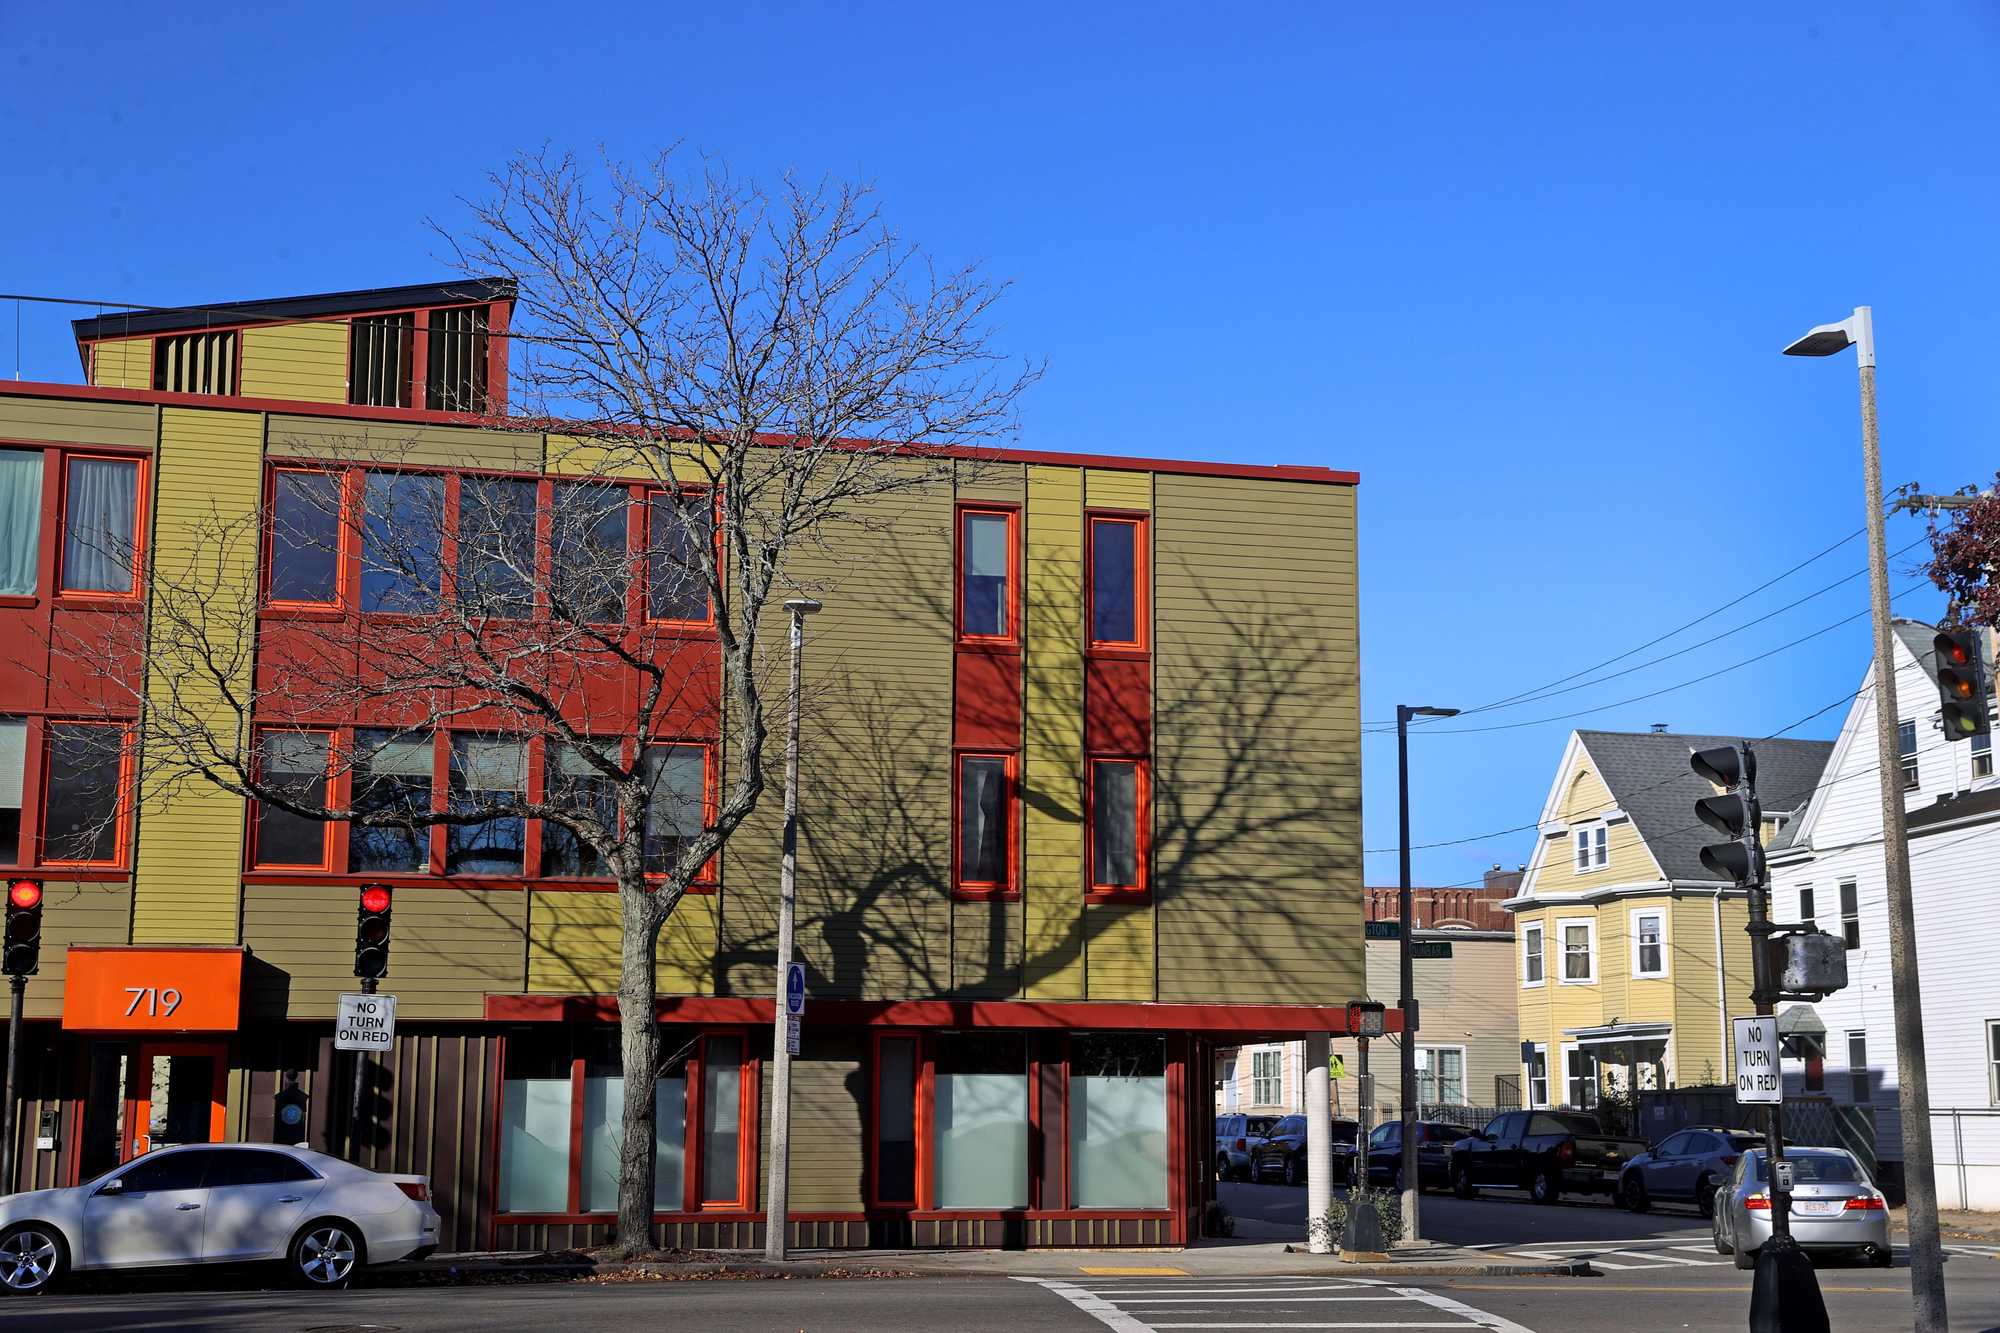 Thomas Duplessy points to these condos on Washington Street in Dorchester — eight three-bedroom units that sold for nearly $4 million combined between 2018 and 2020 — as examples of why he should hold onto his home on Dunbar Avenue.